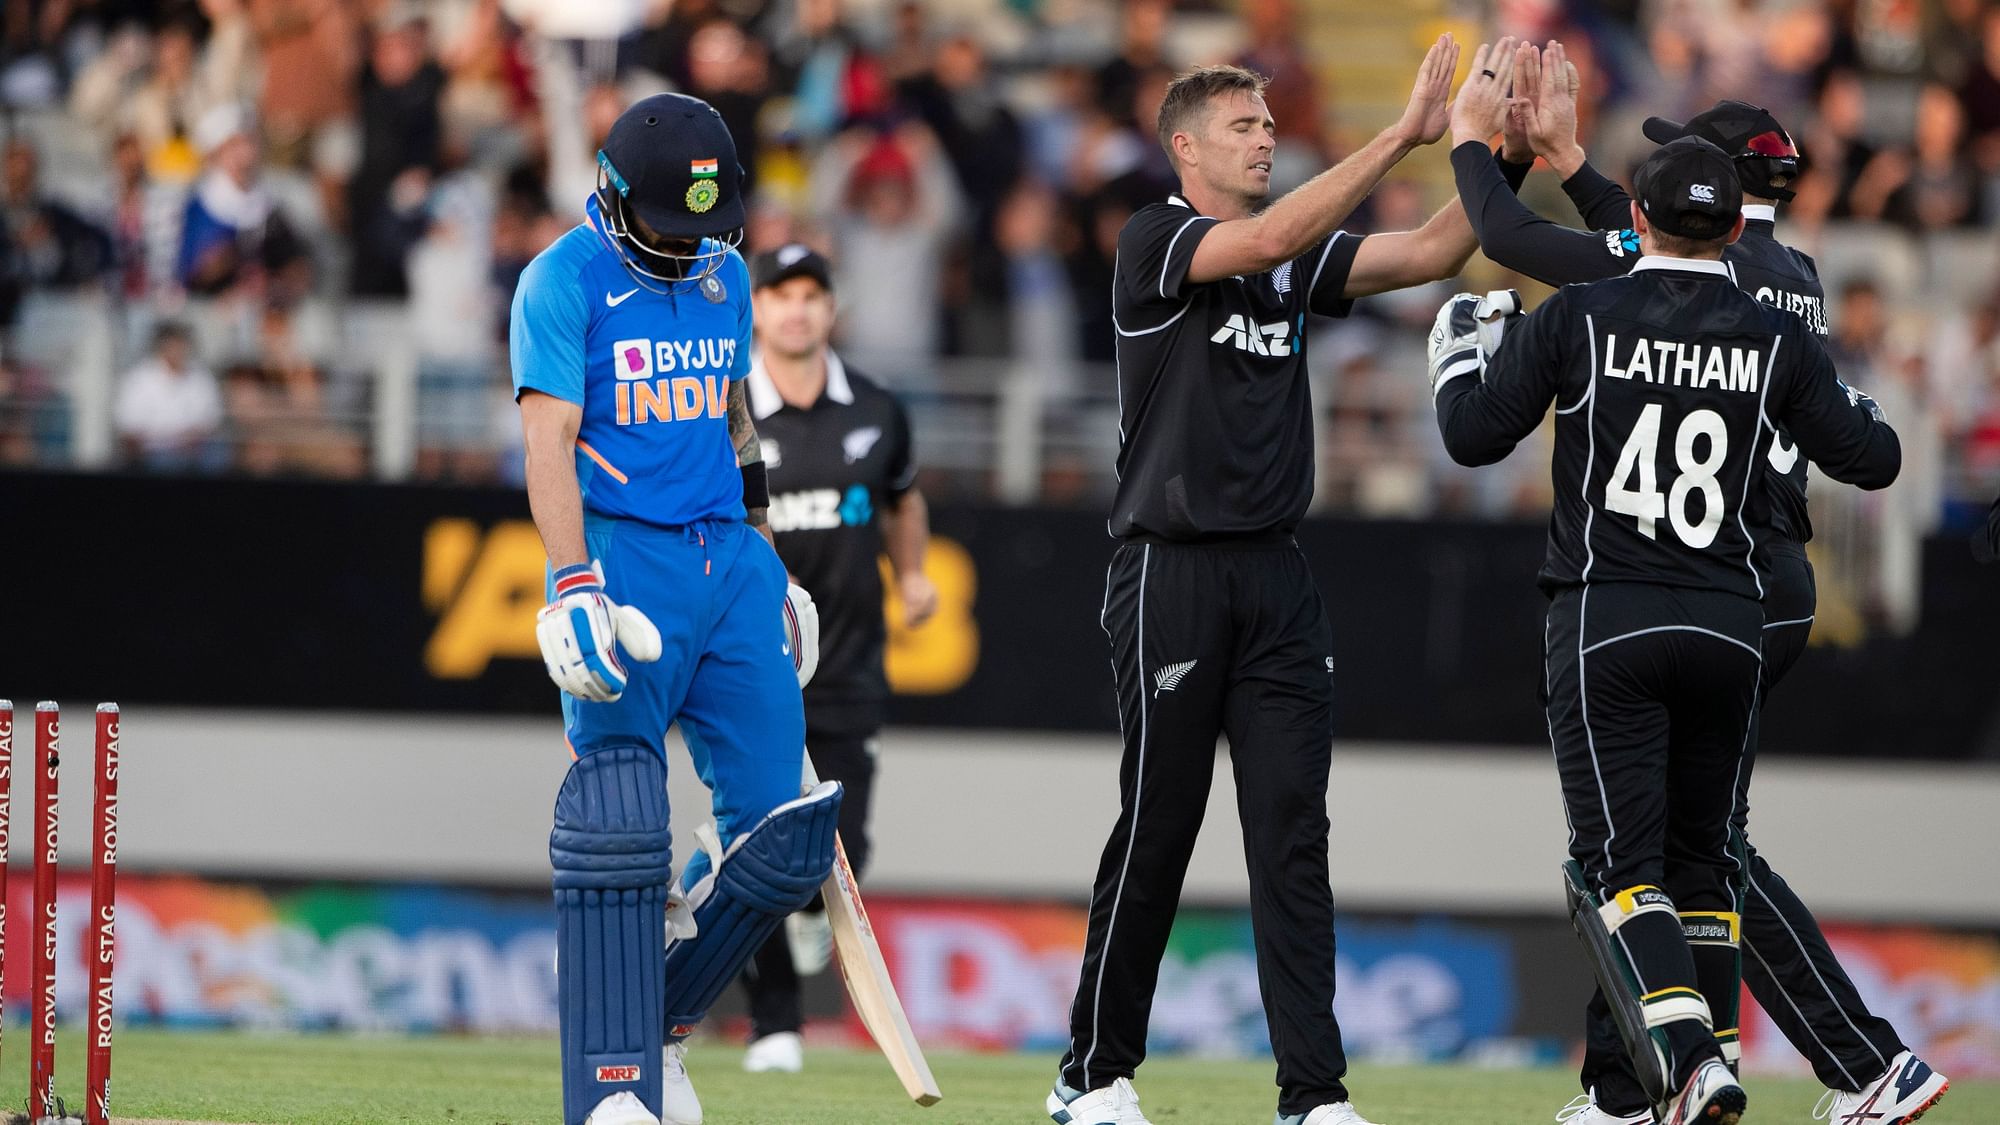 New Zealand have an unassailable 2-0 lead against India in the three-match ODI series after losing the T20I series 5-0.